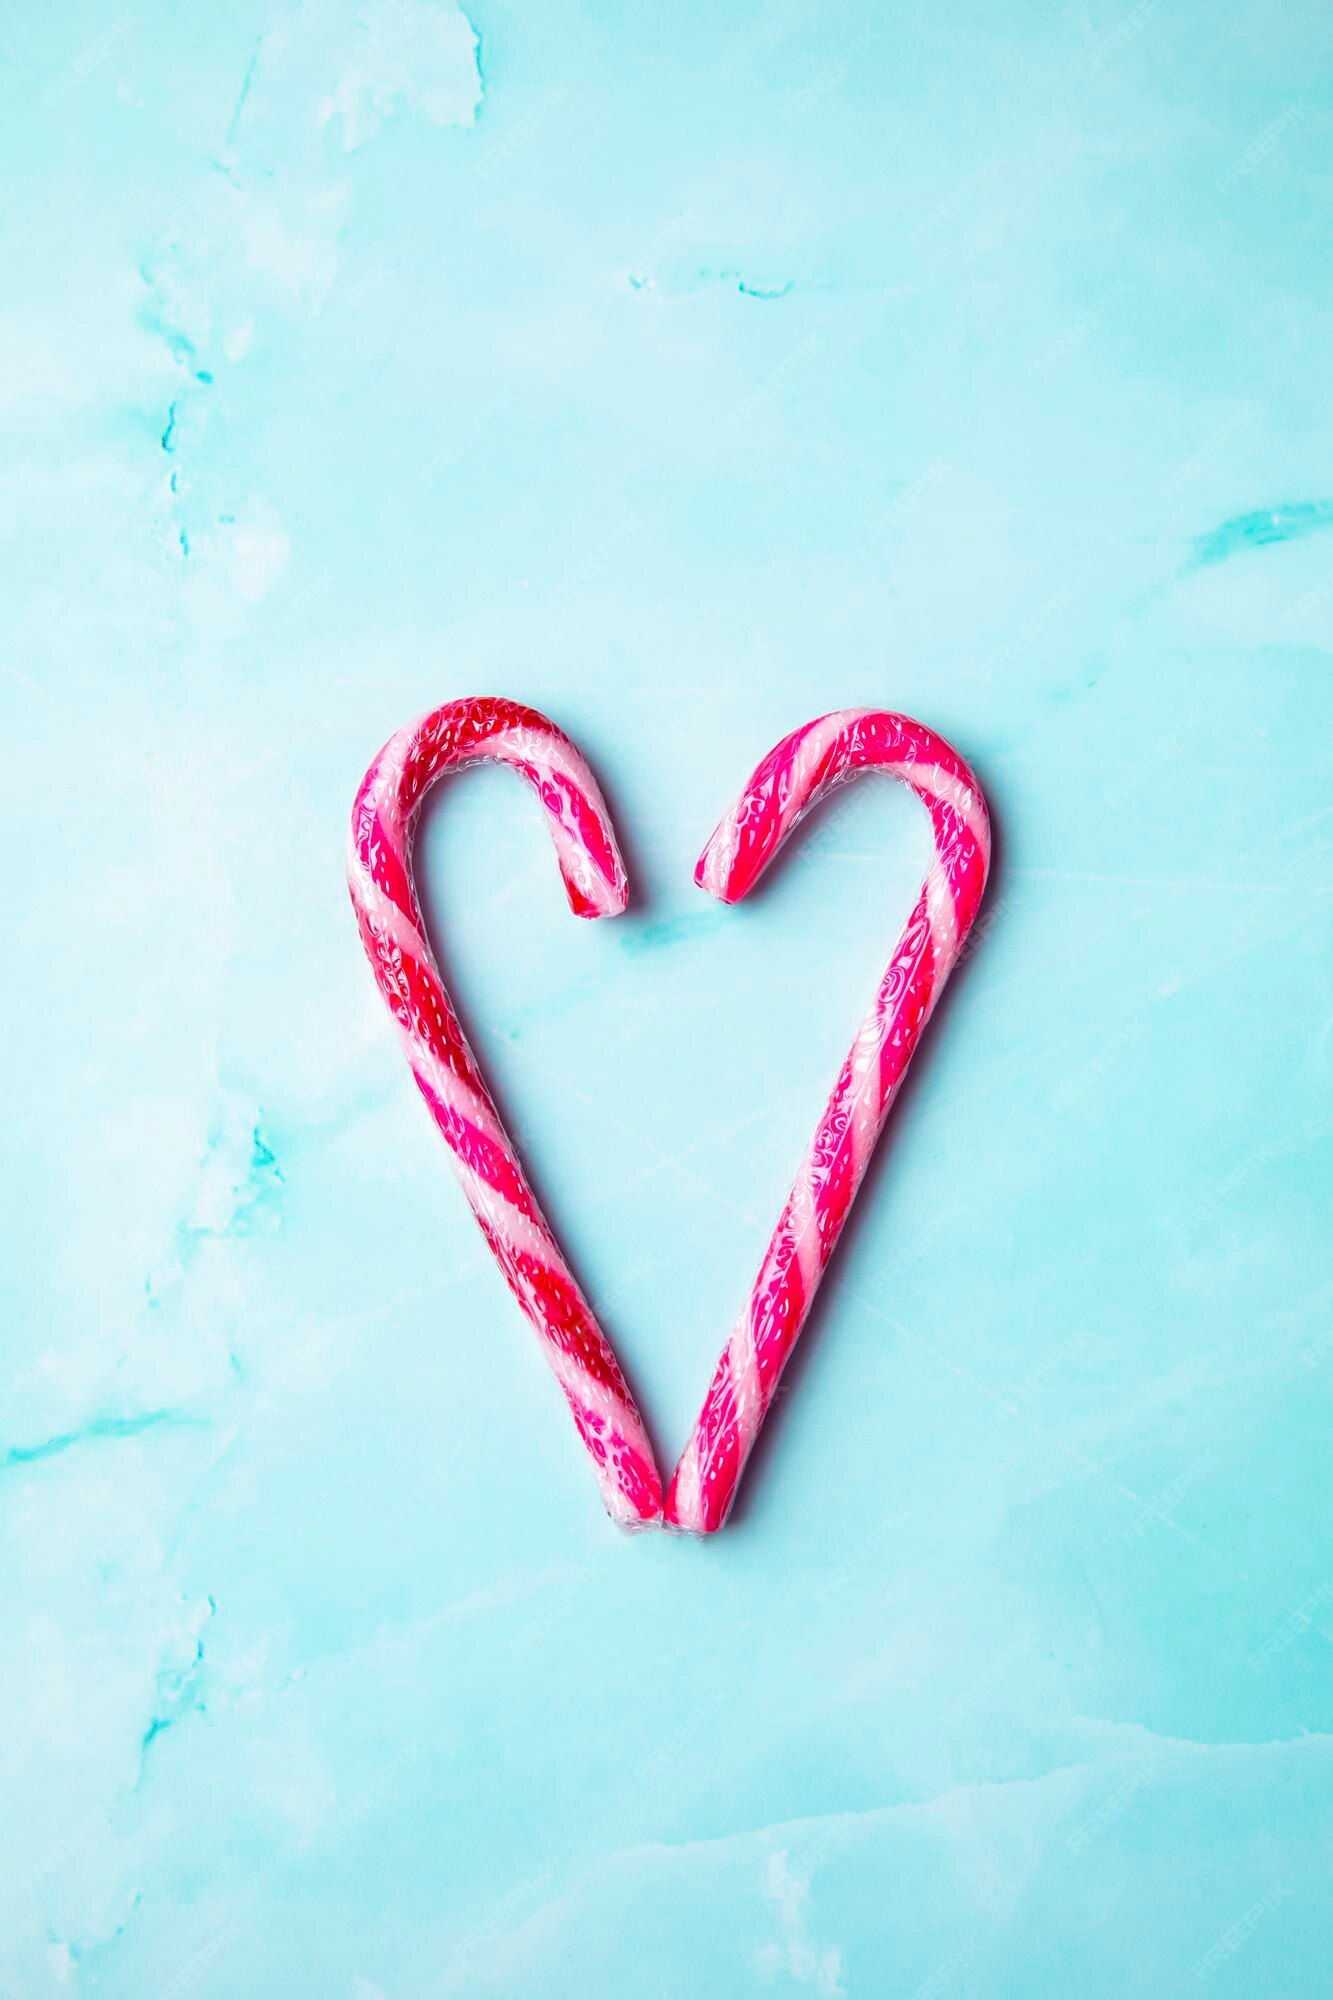 Two candy canes forming a heart shape on a blue background - Candy cane